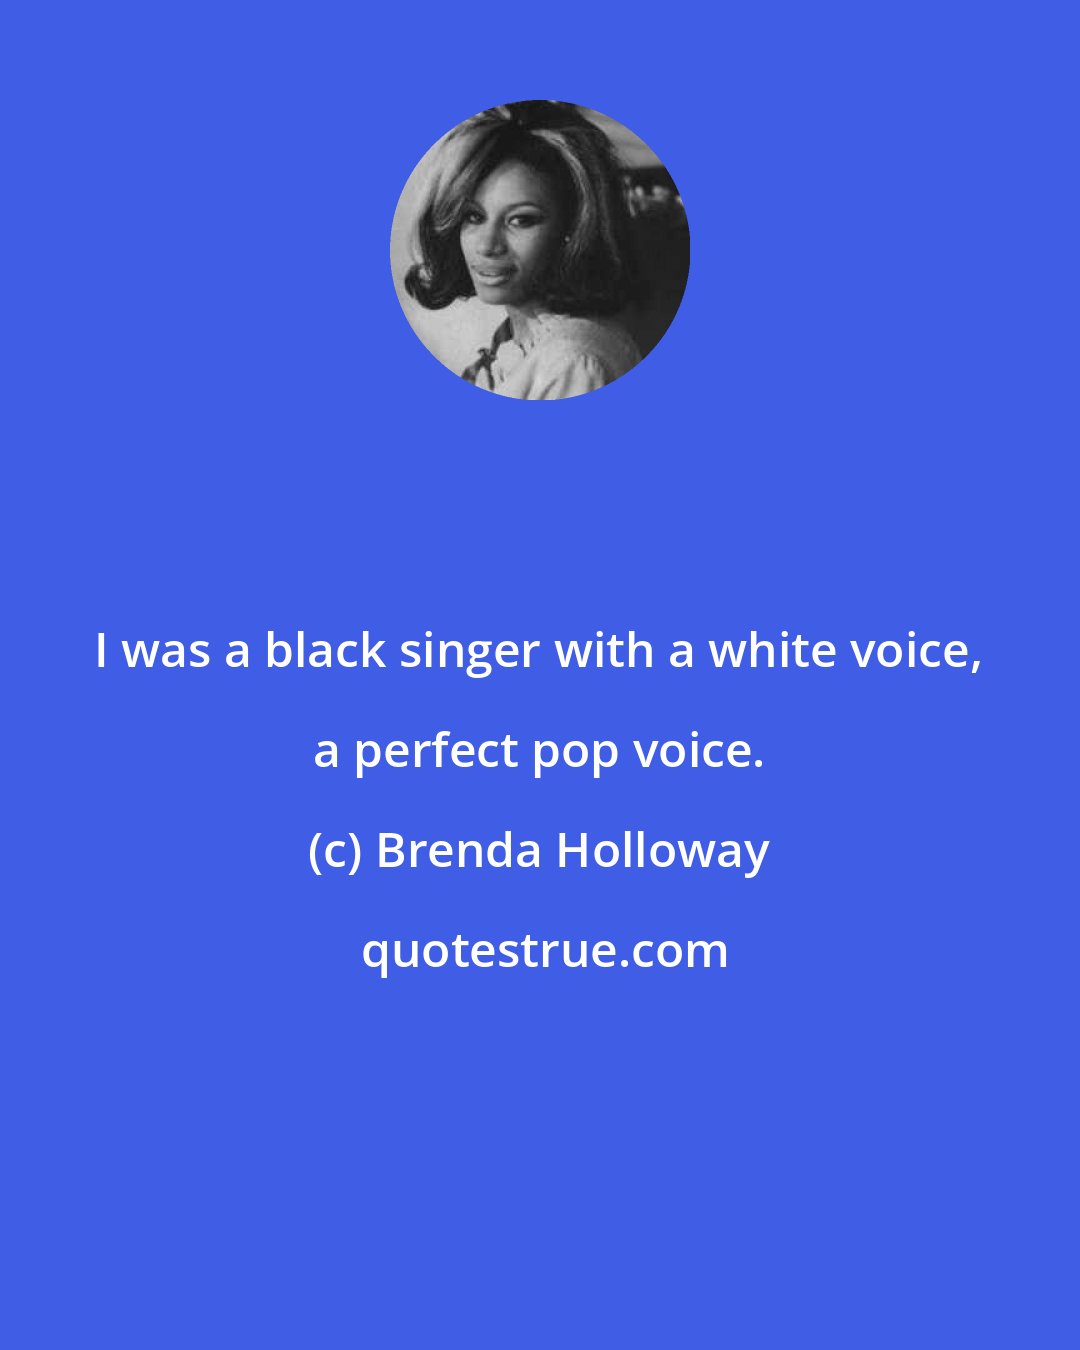 Brenda Holloway: I was a black singer with a white voice, a perfect pop voice.